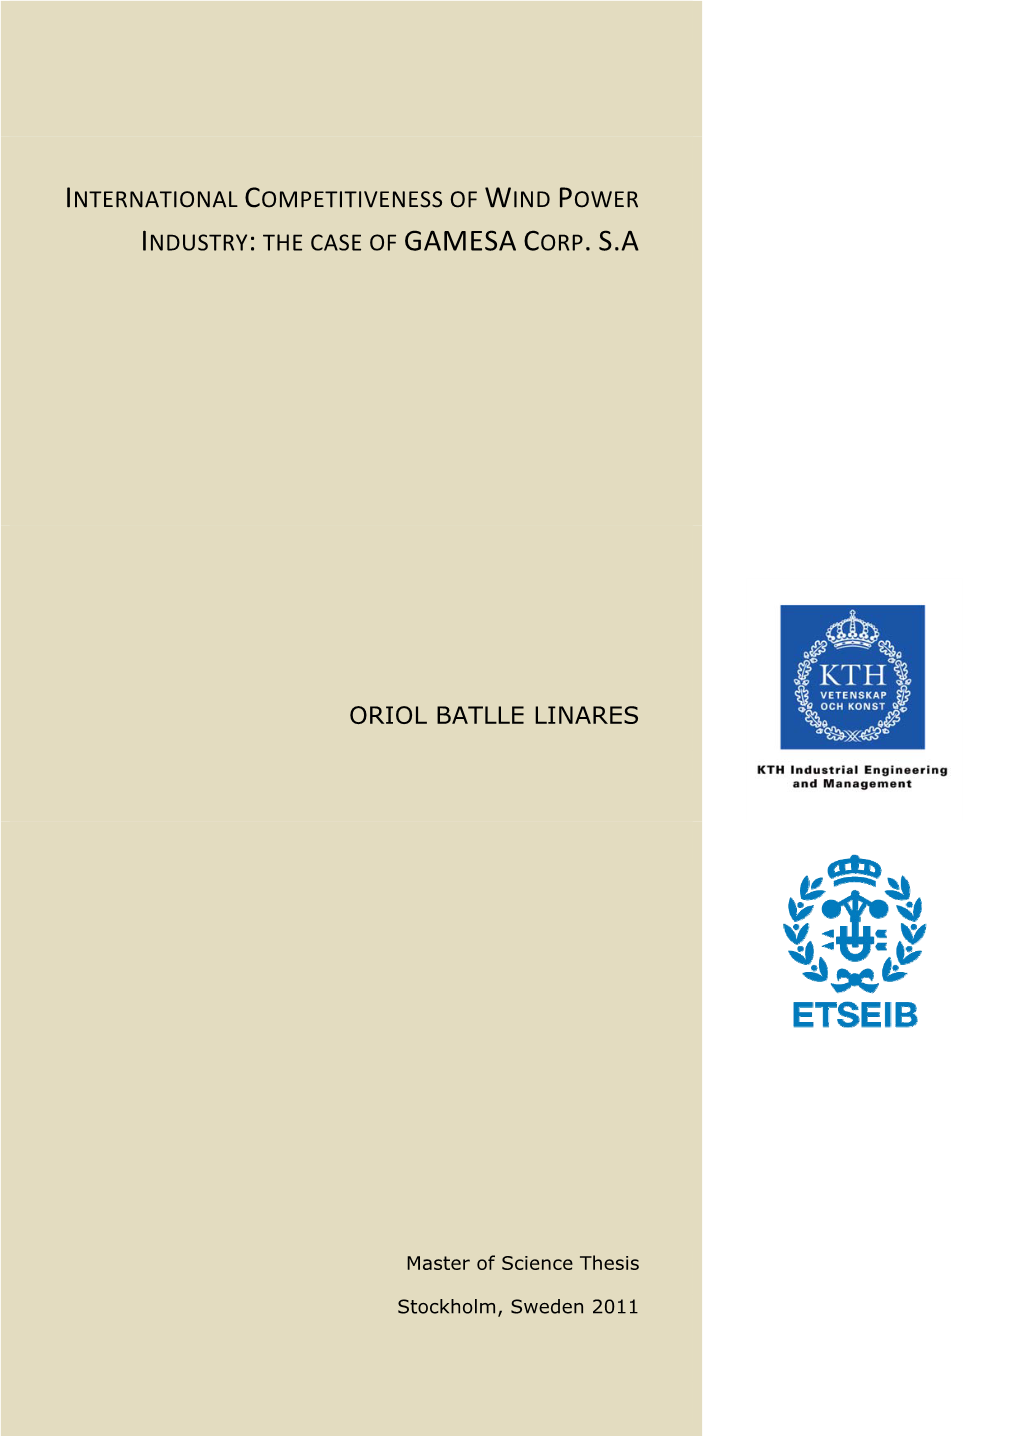 International Competitiveness of Wind Power Industry: the Case of Gamesa Corp